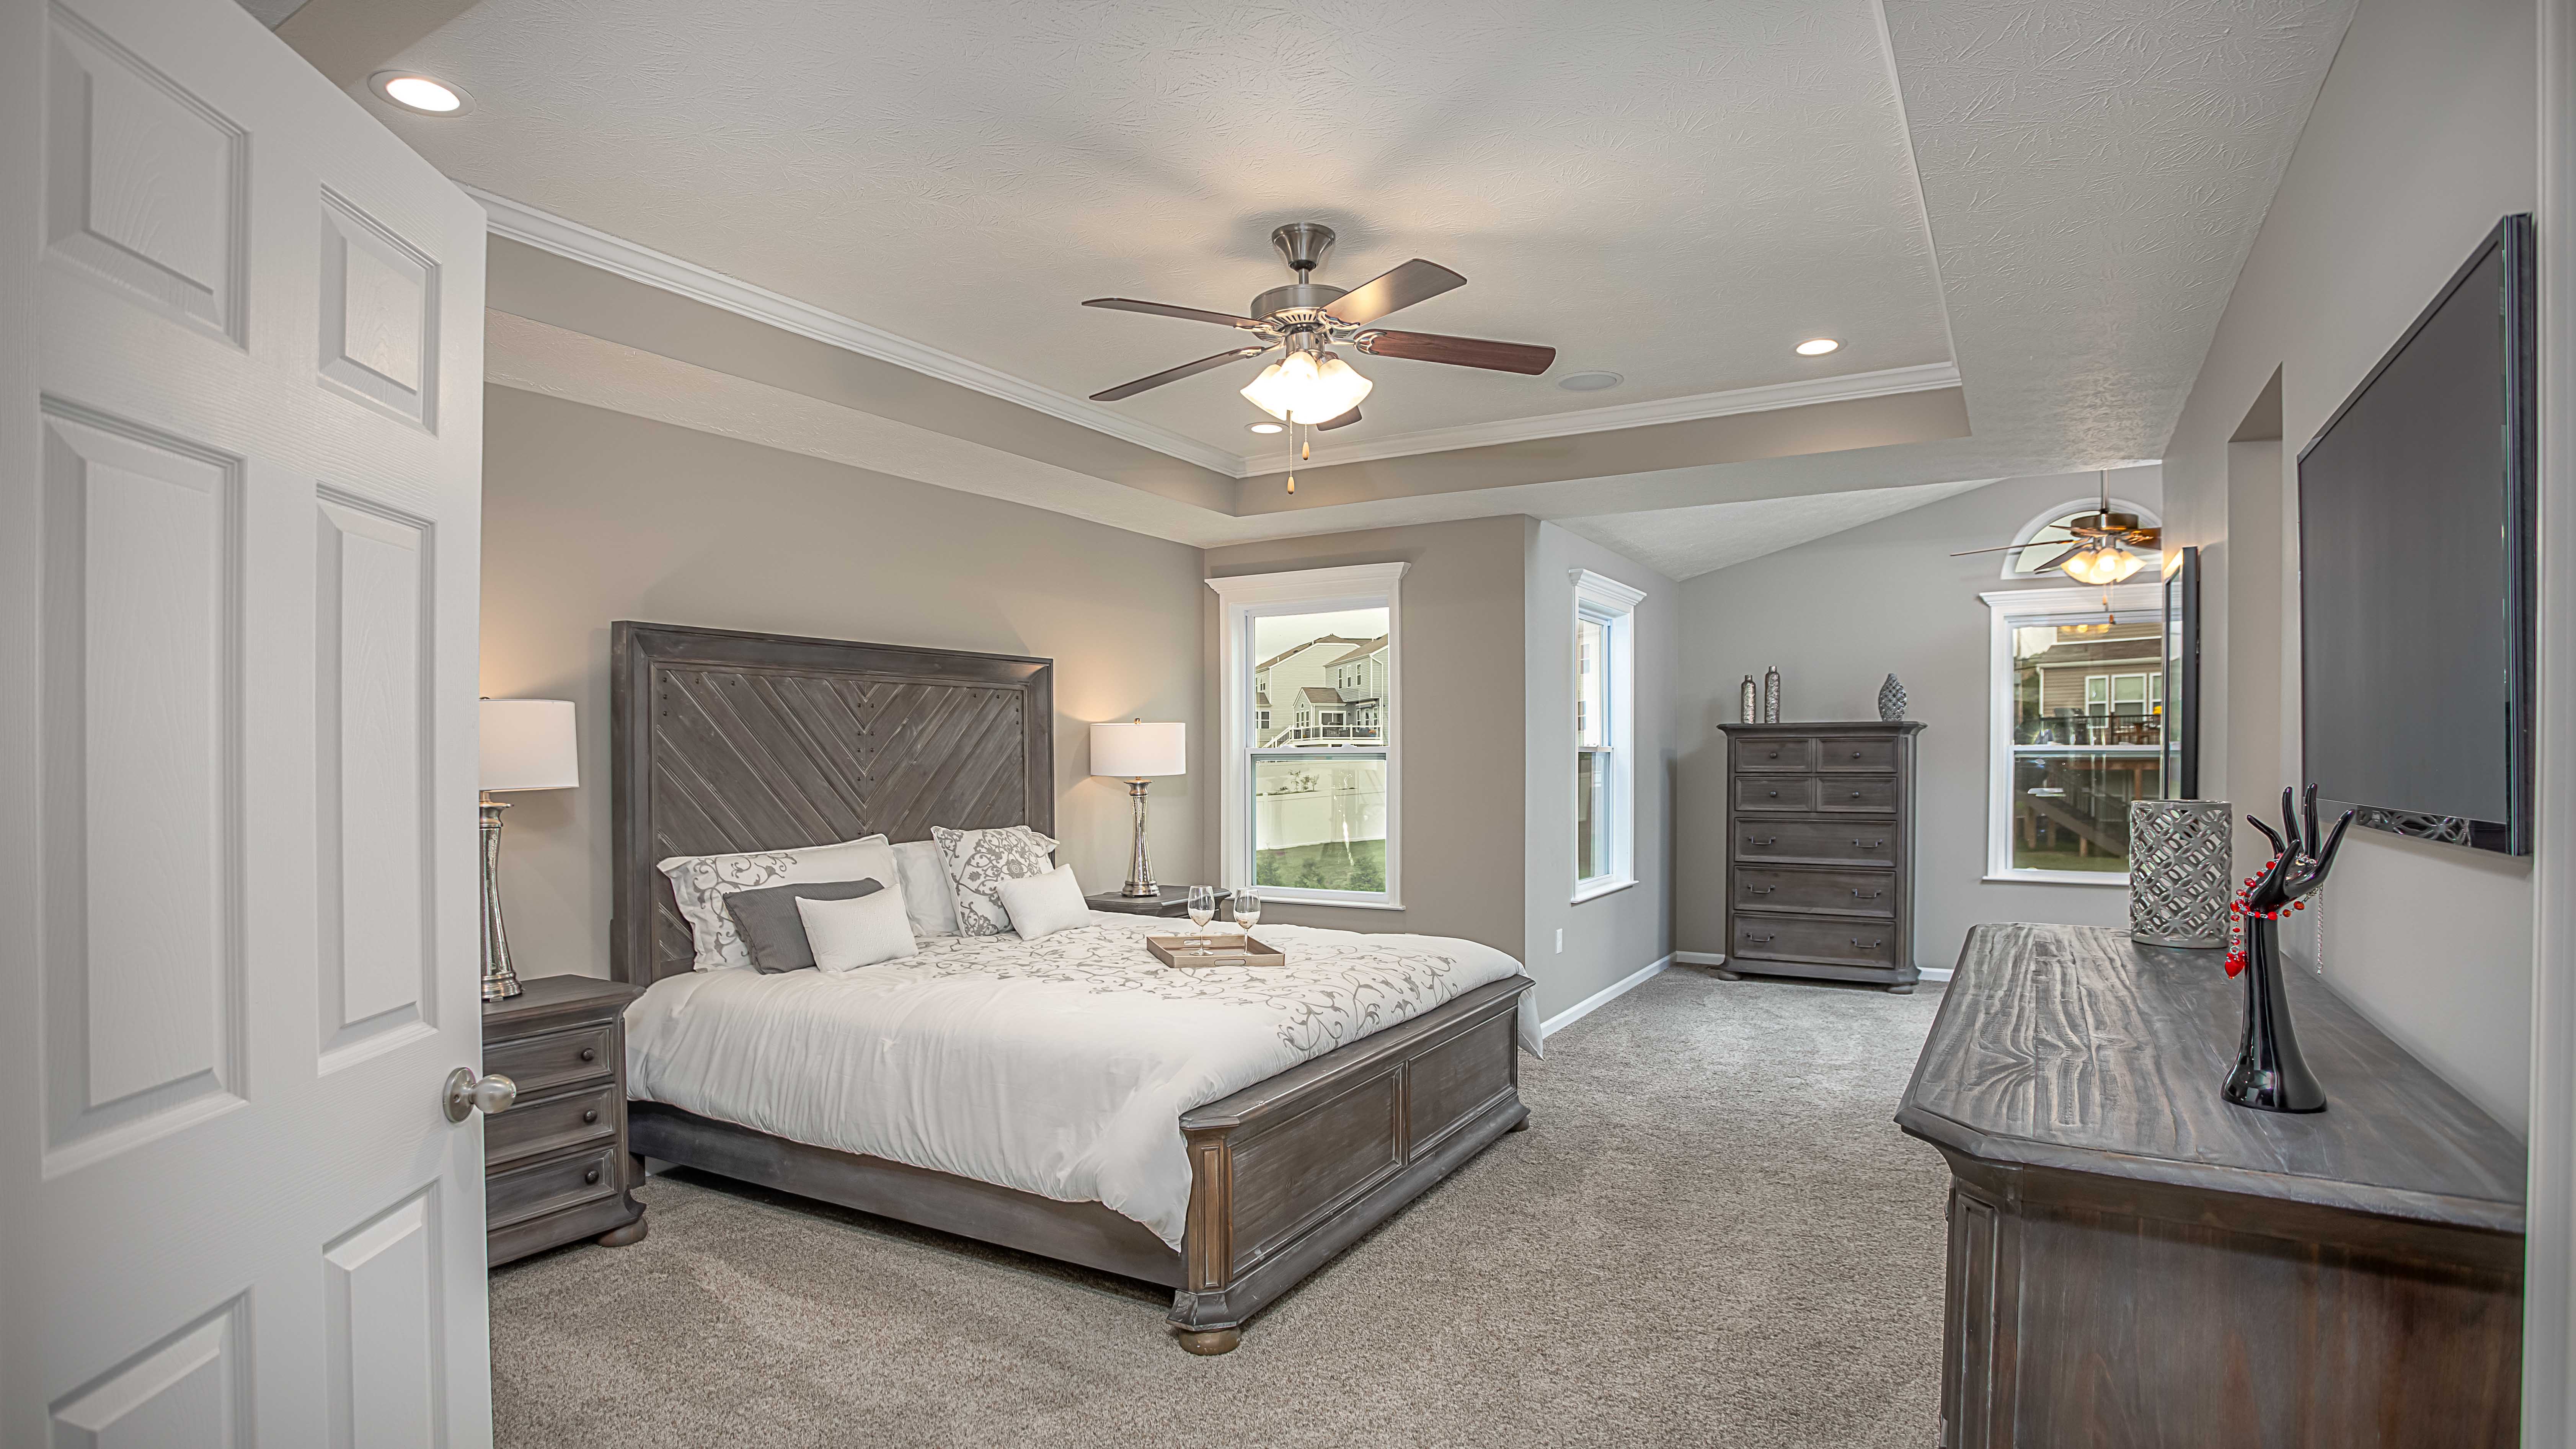 Master suite of a new home in Pleasant Hills, PA